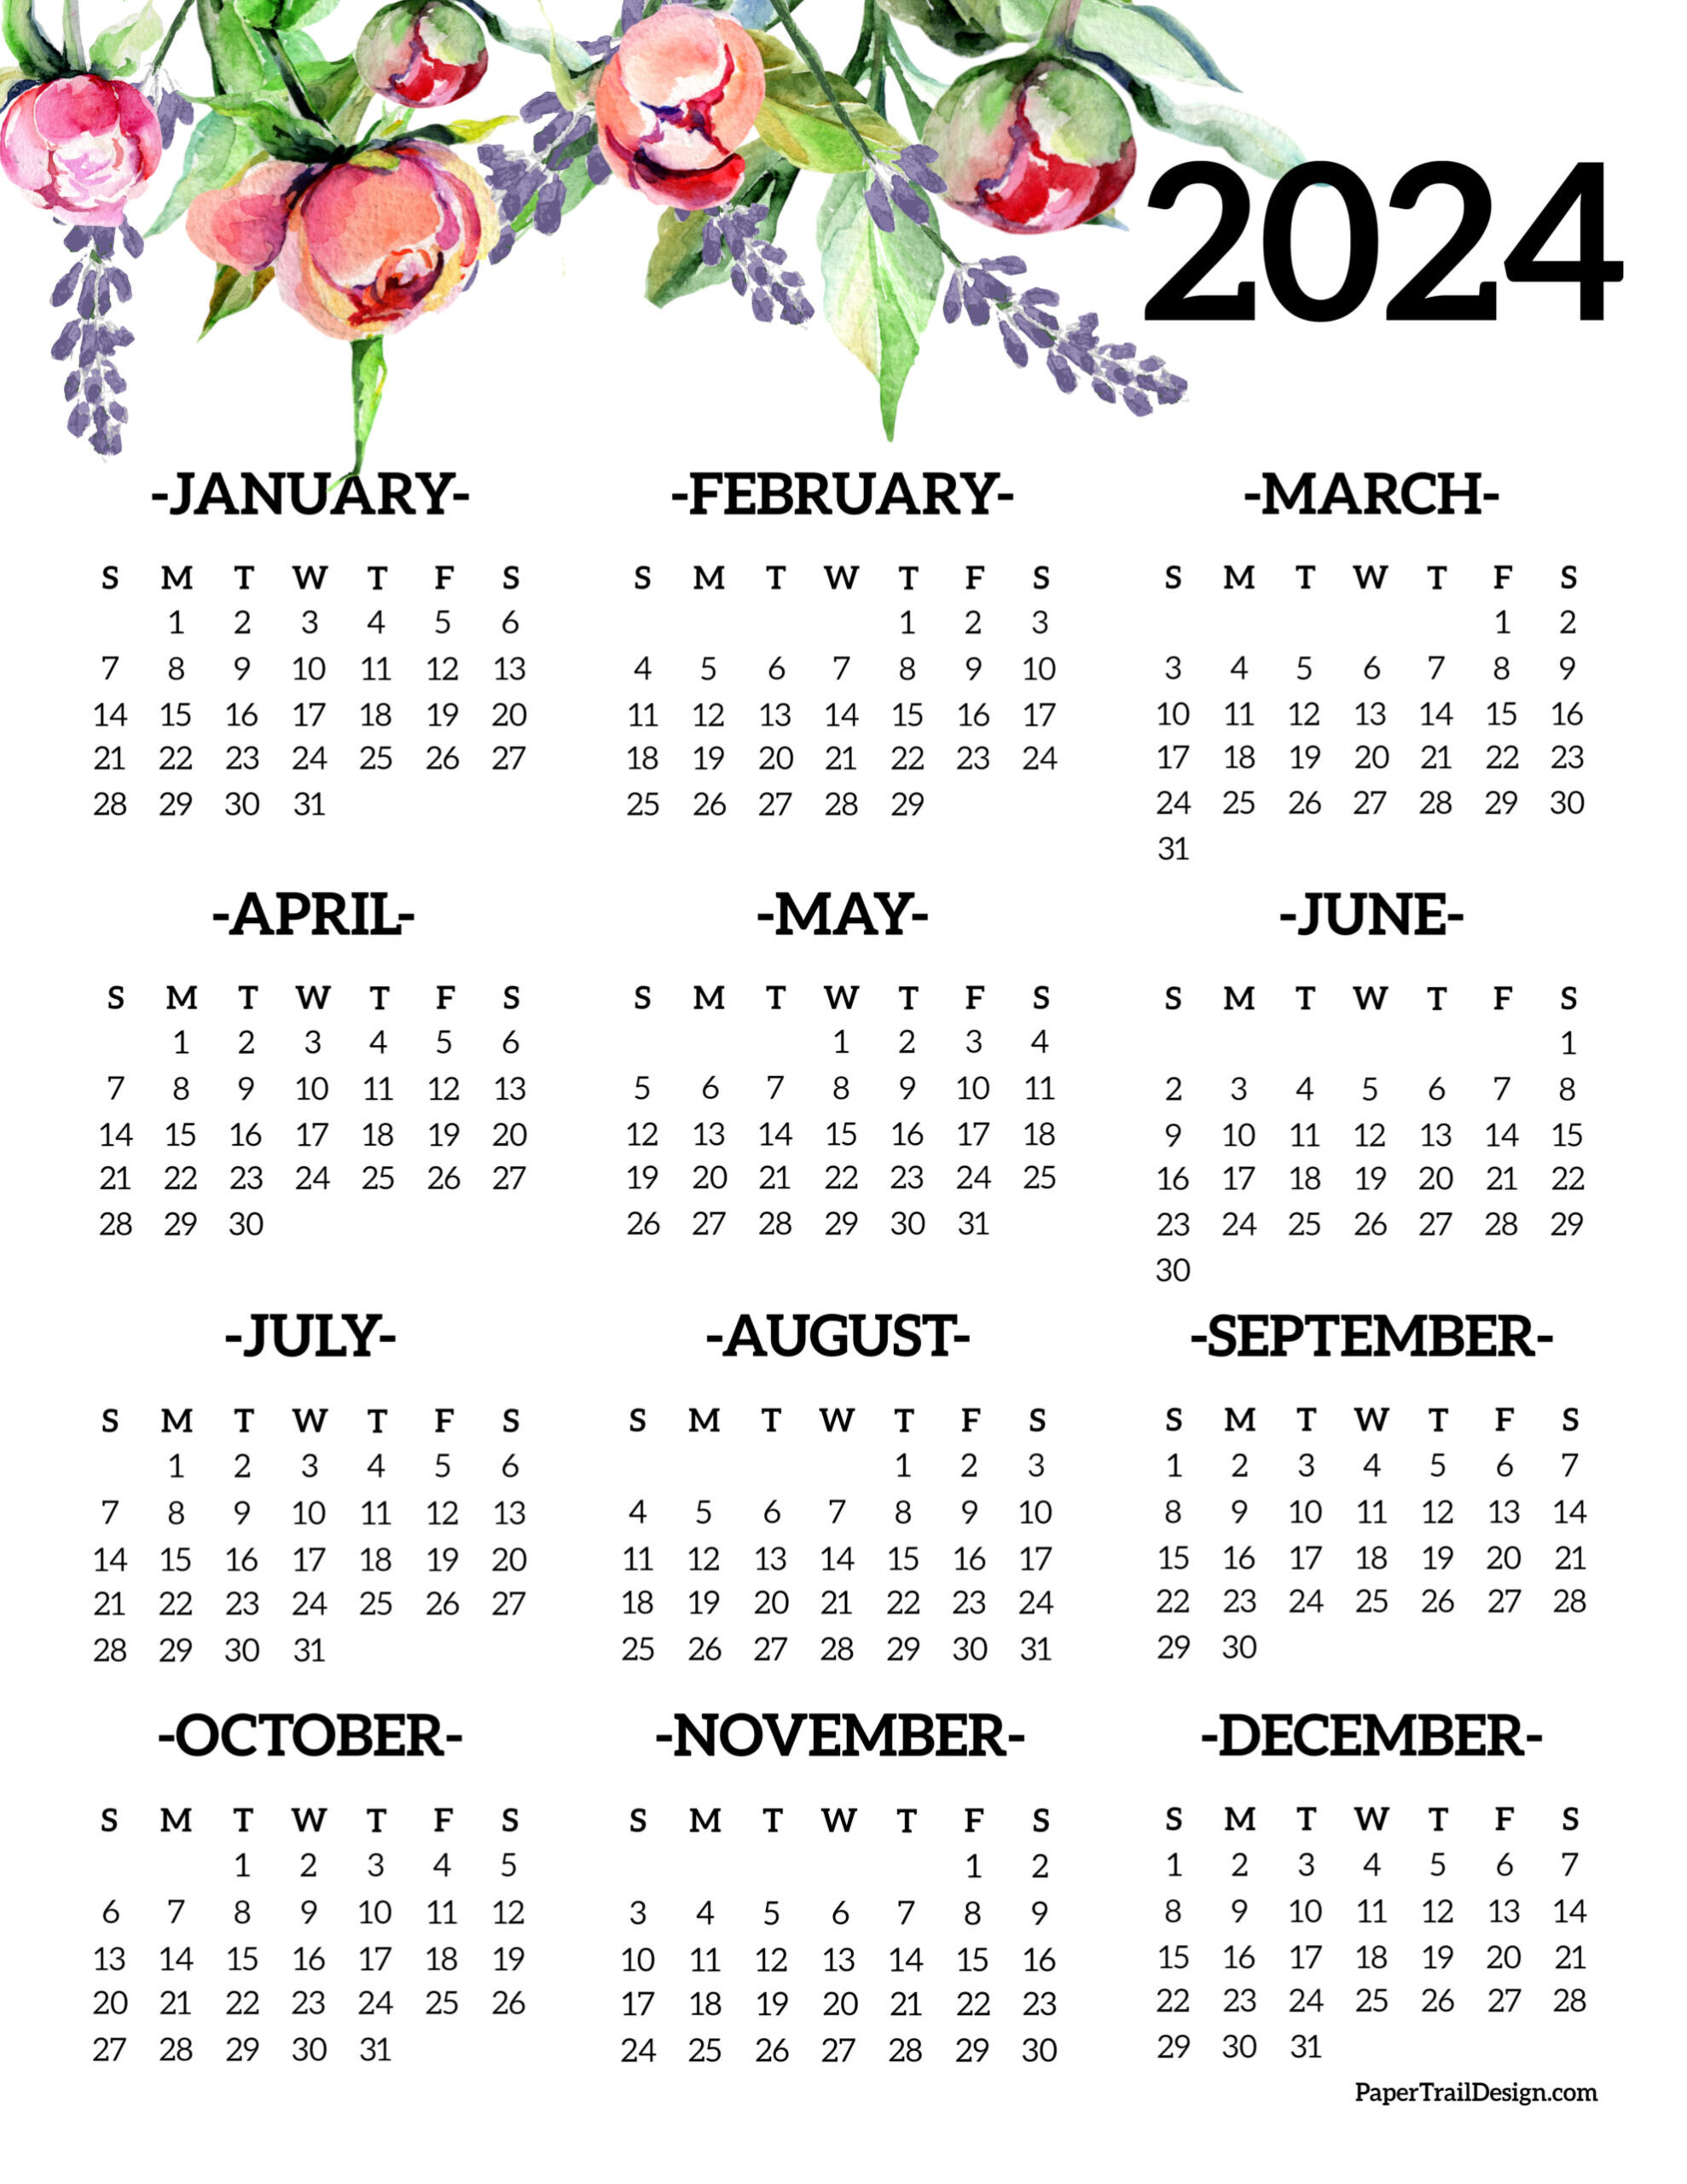 Calendar 2024 Printable One Page - Paper Trail Design for Printable 1 Page 2024 Calendar